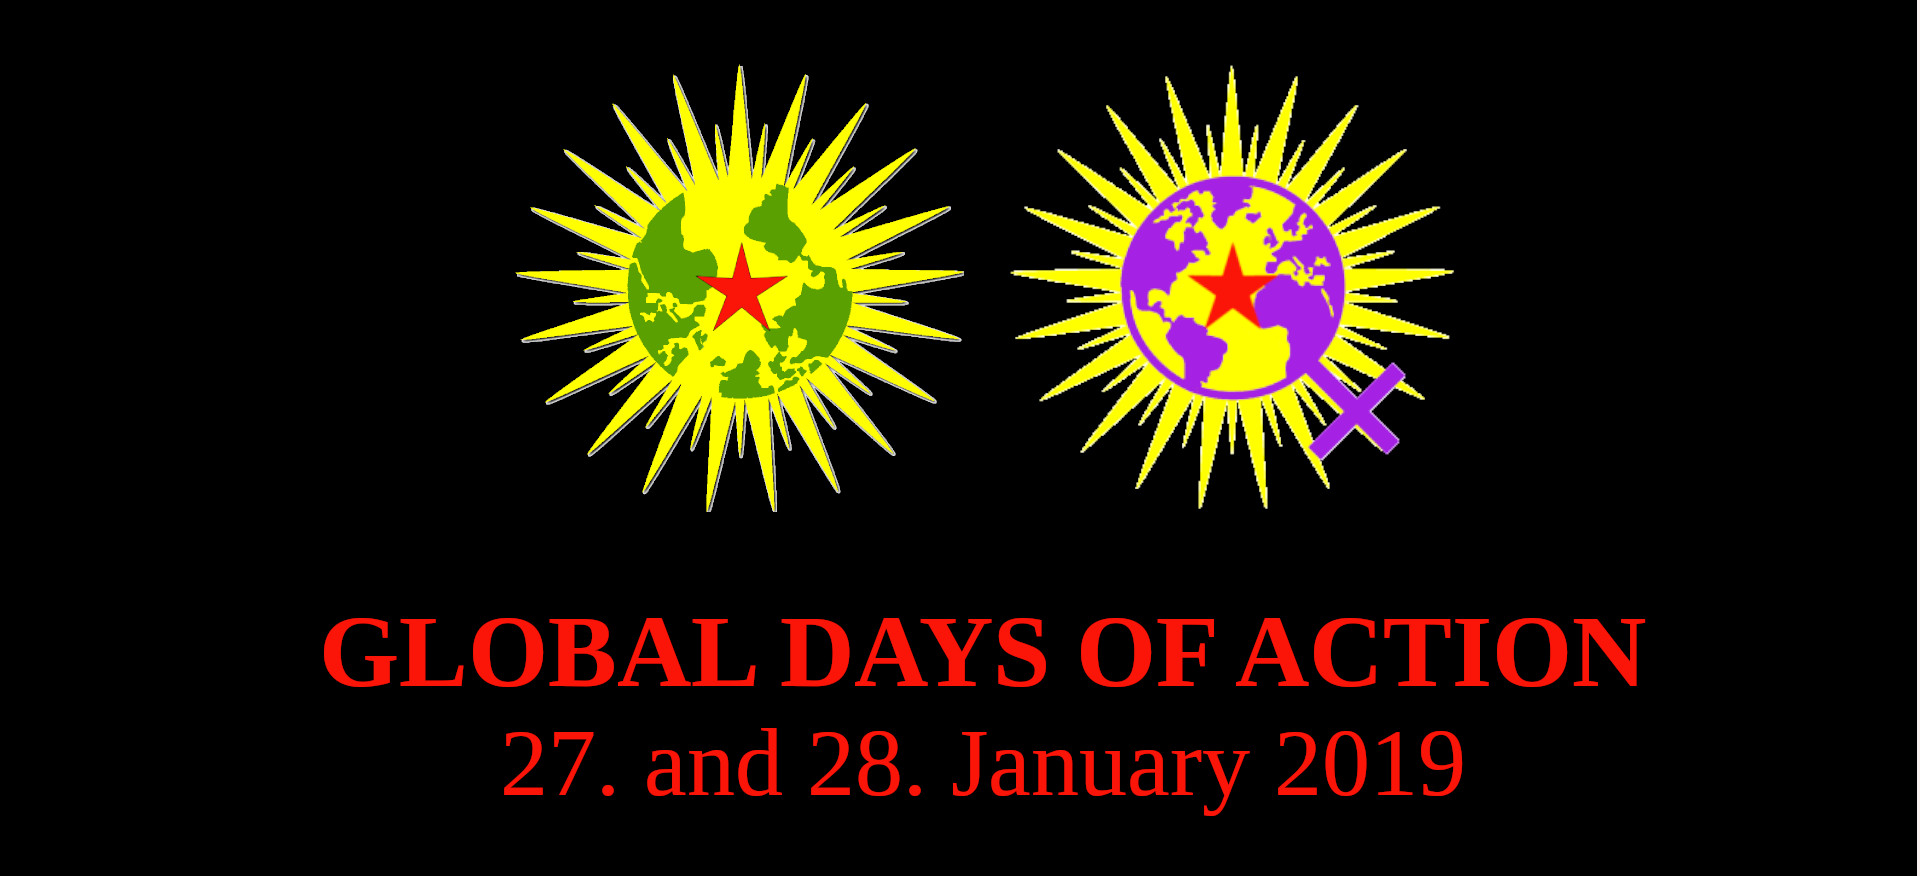 # RiseUp4Rojava – Call for global days of action on 27 and 28 January 2019